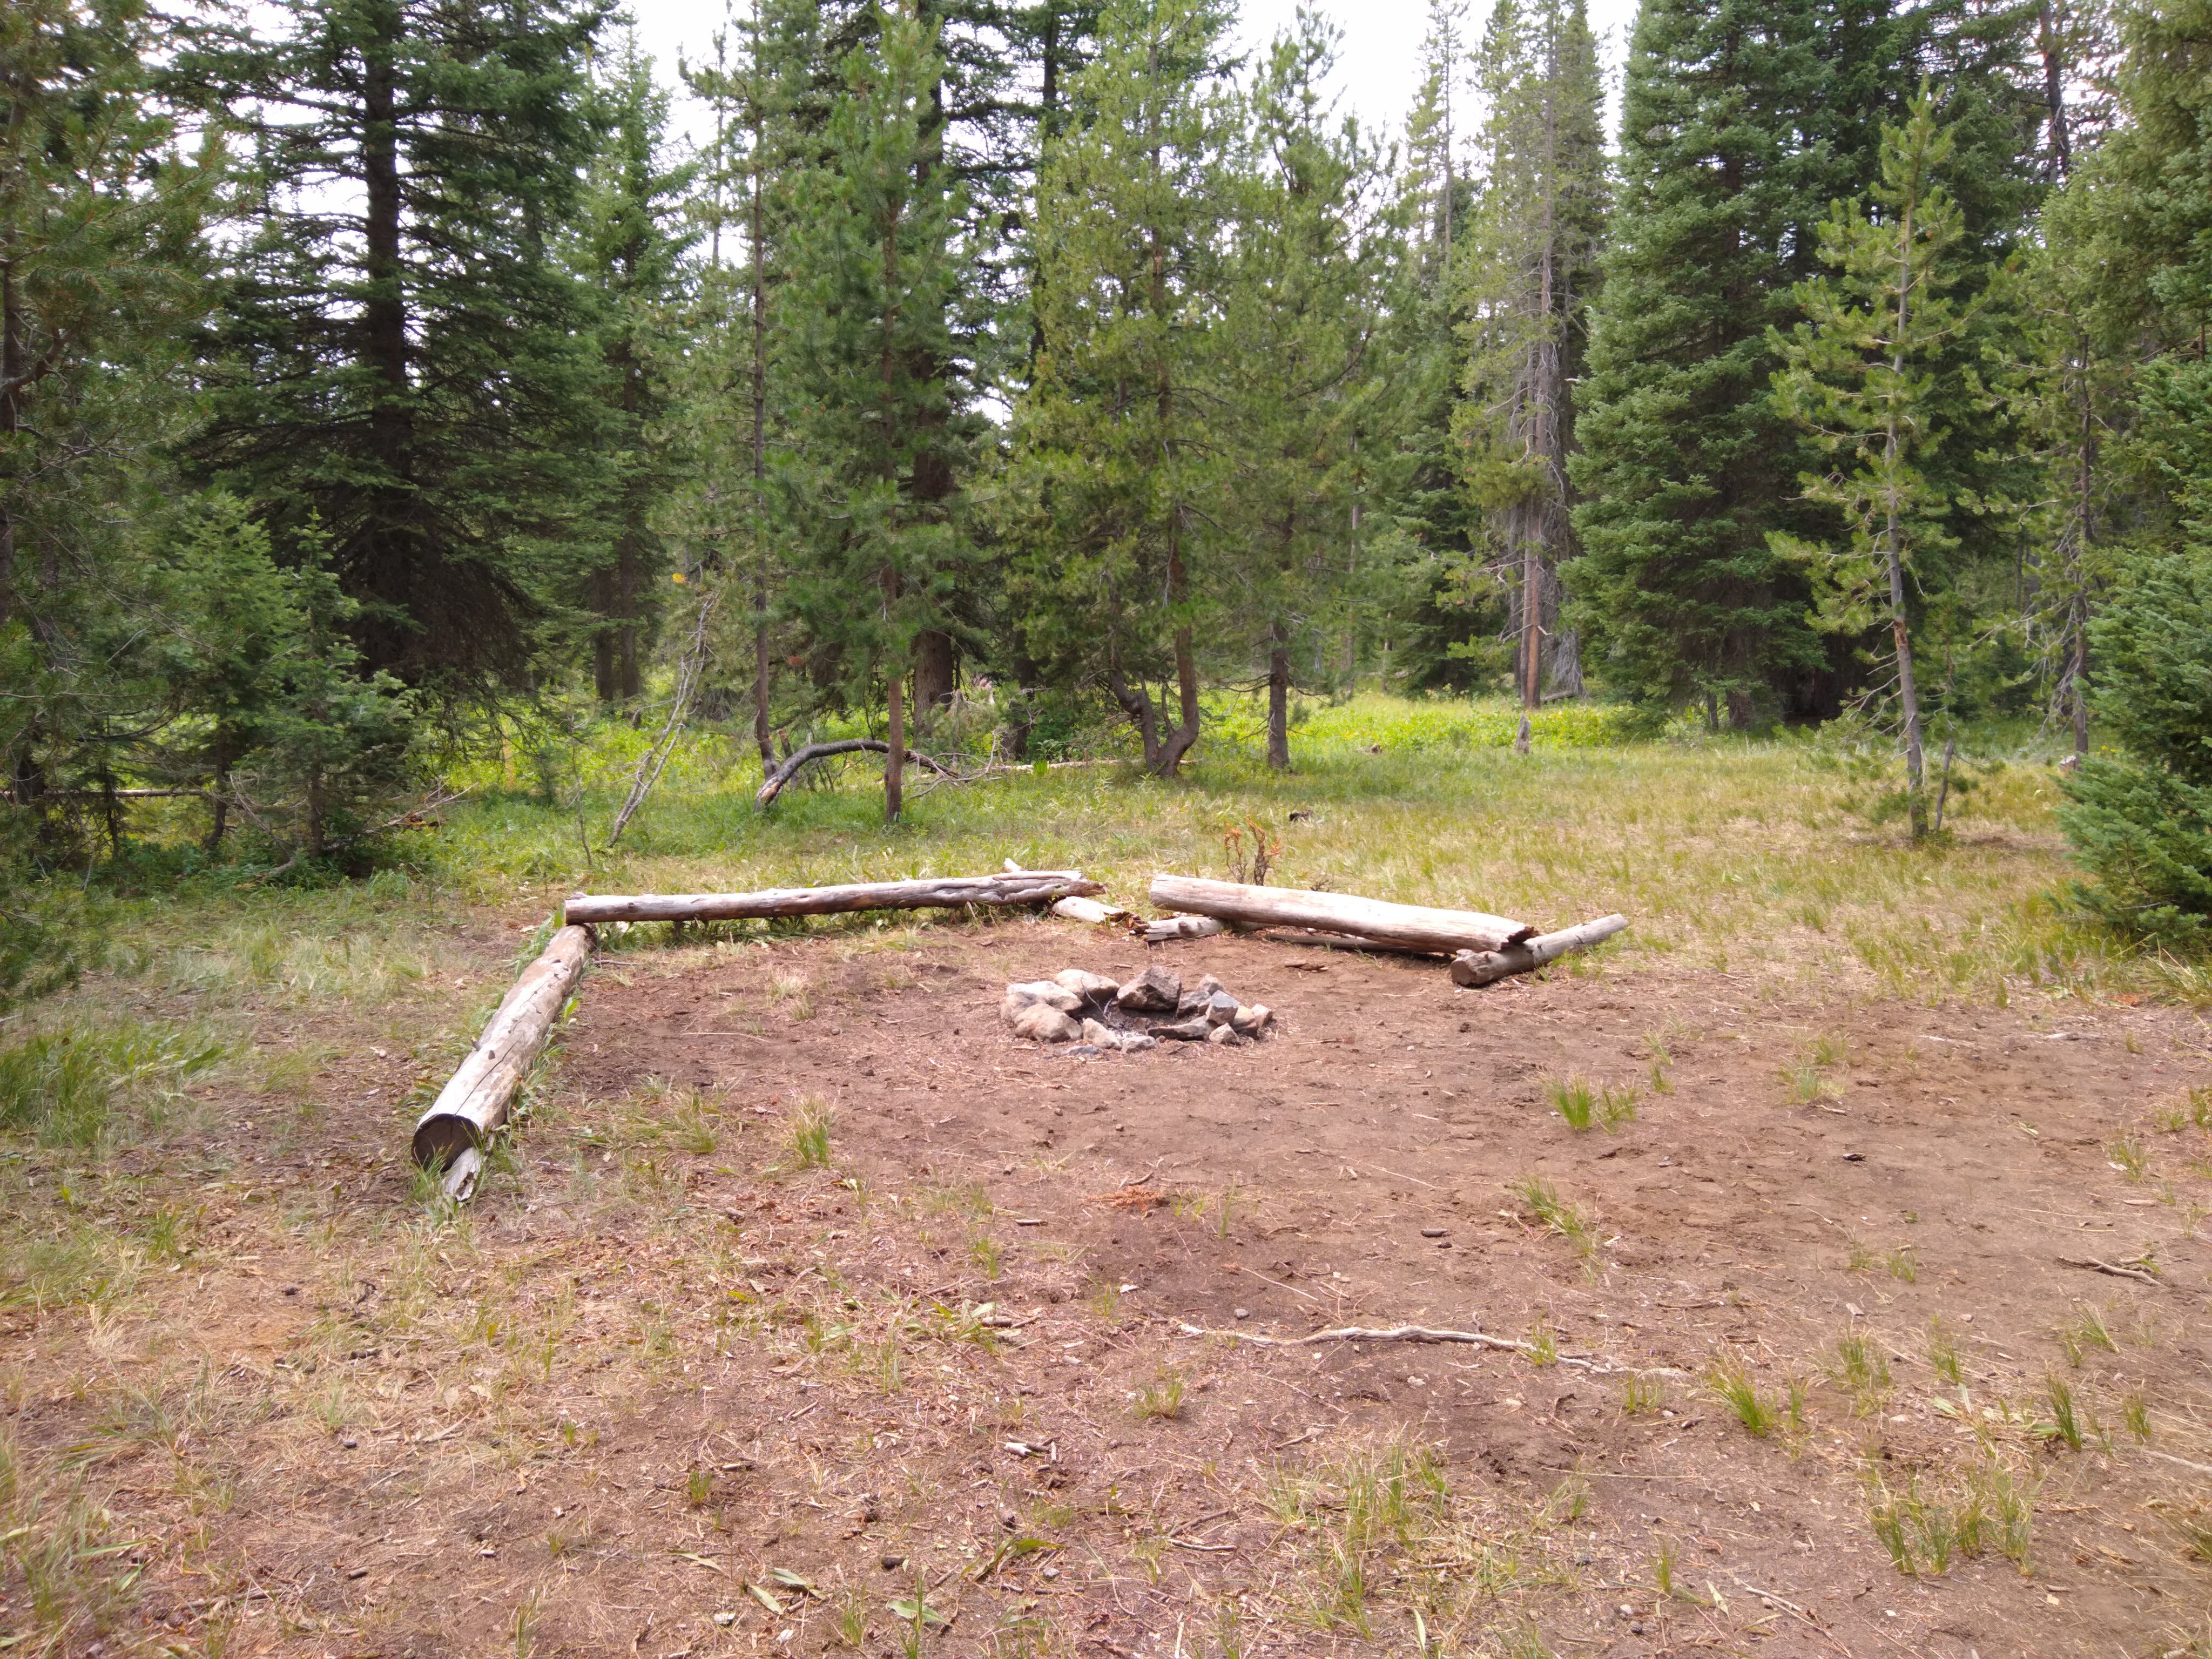 Camper submitted image from 9U1 Yellowstone National Park Backcountry — Yellowstone National Park - 2